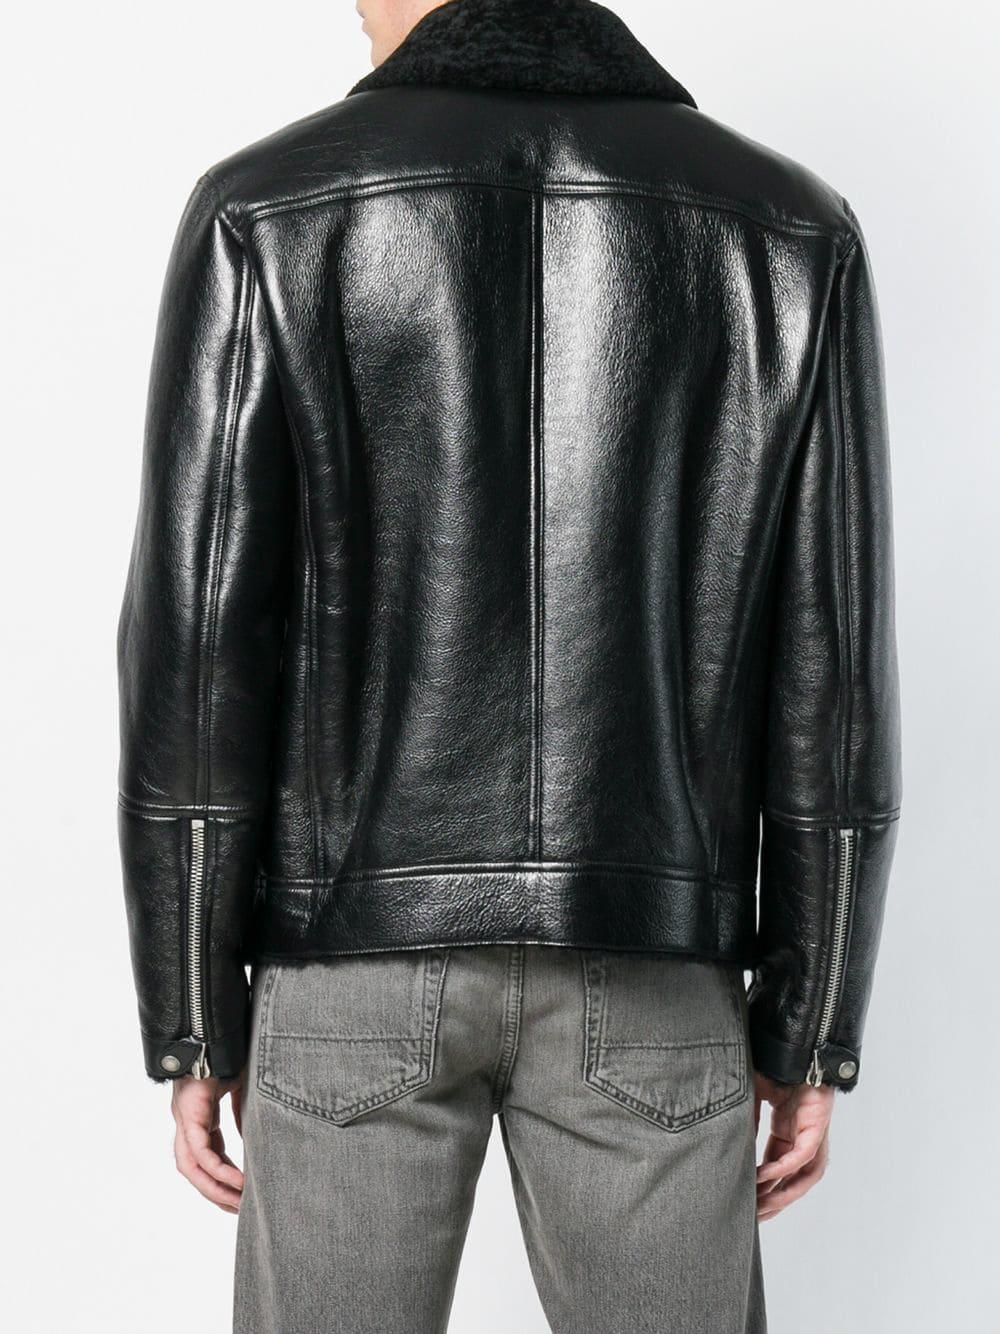 Tom Ford Shearling Collar Leather Jacket in Black for Men - Lyst